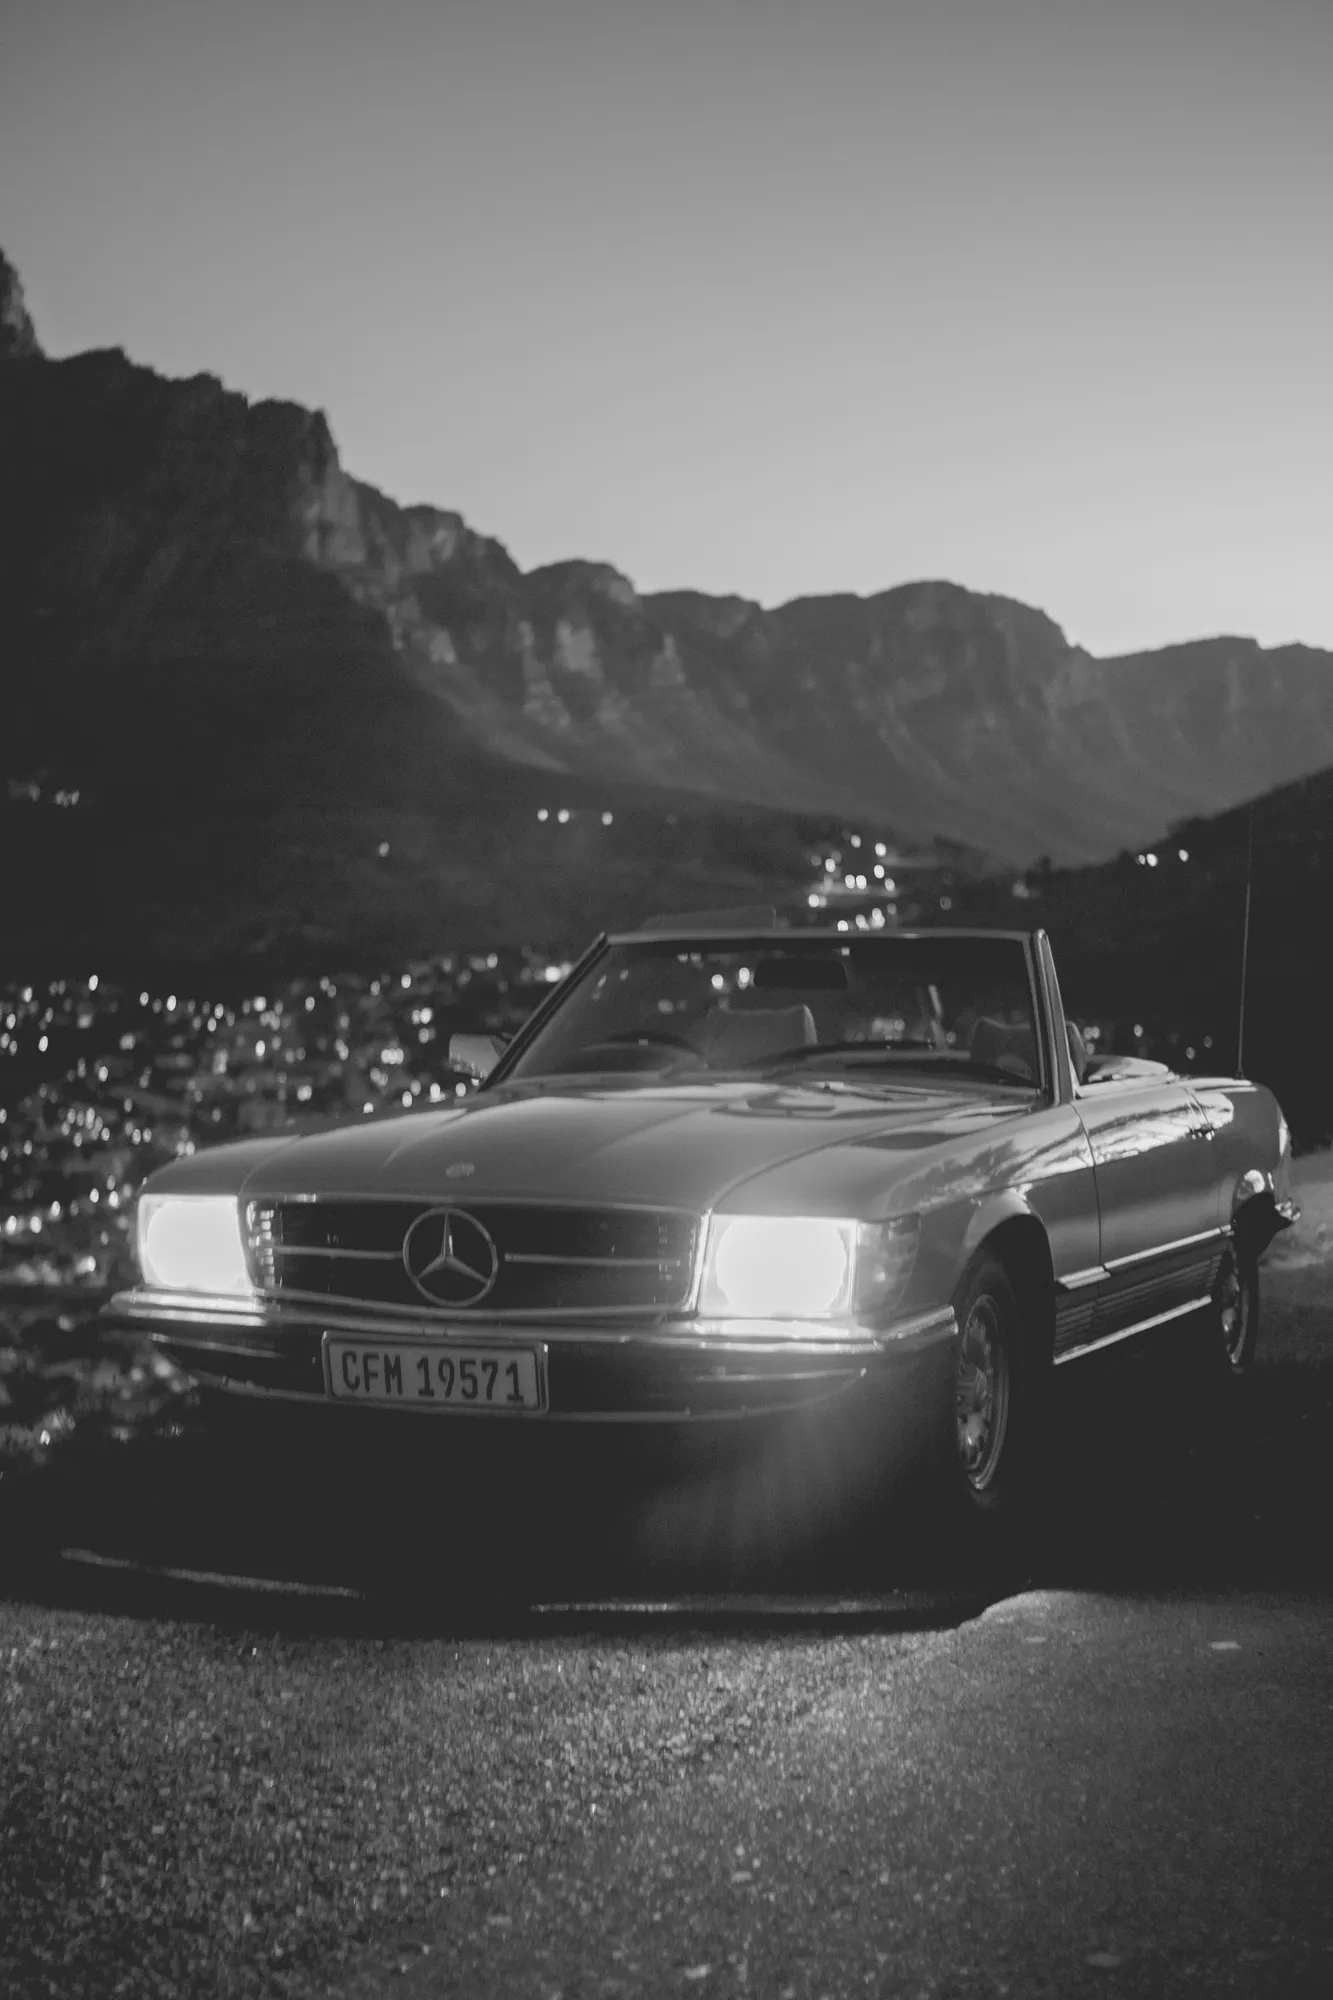 2022-02-17 - Cape Town - Old Mercedes parked in front of mountains